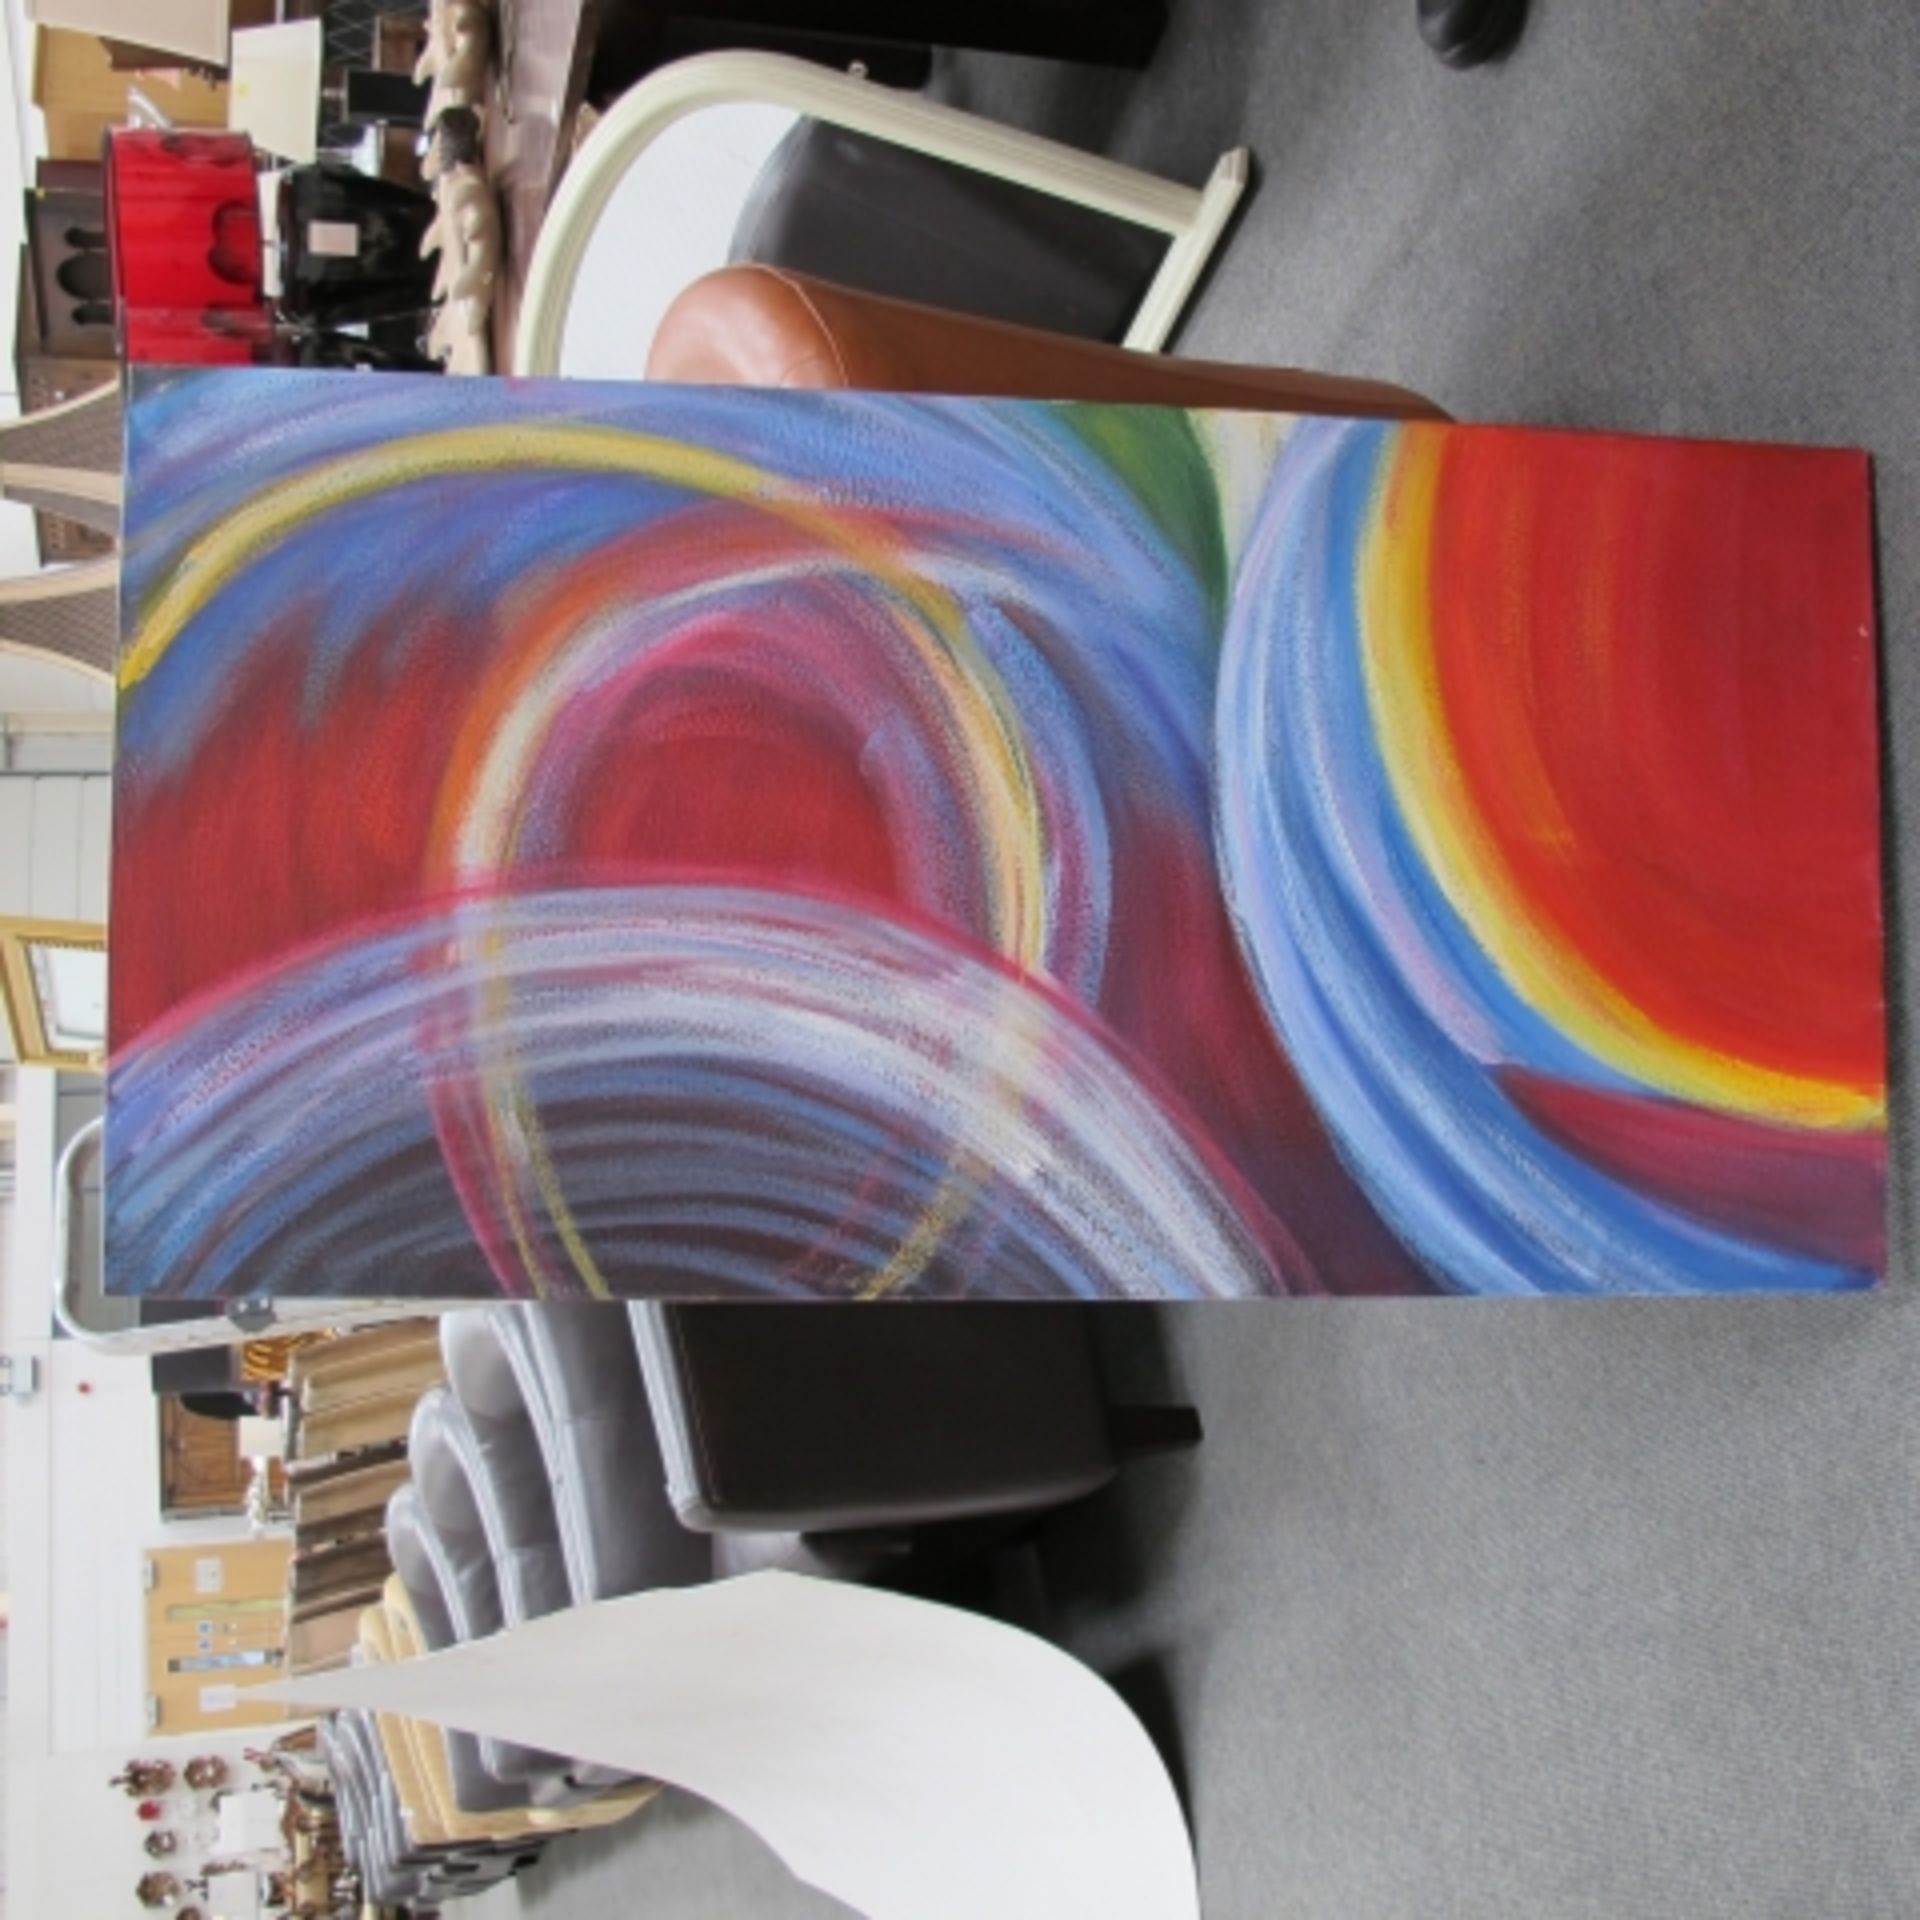 Collection of five unframed abstract oil paintings by Rachel Jack Ltd Artists (est. £20-£40) - Image 6 of 6